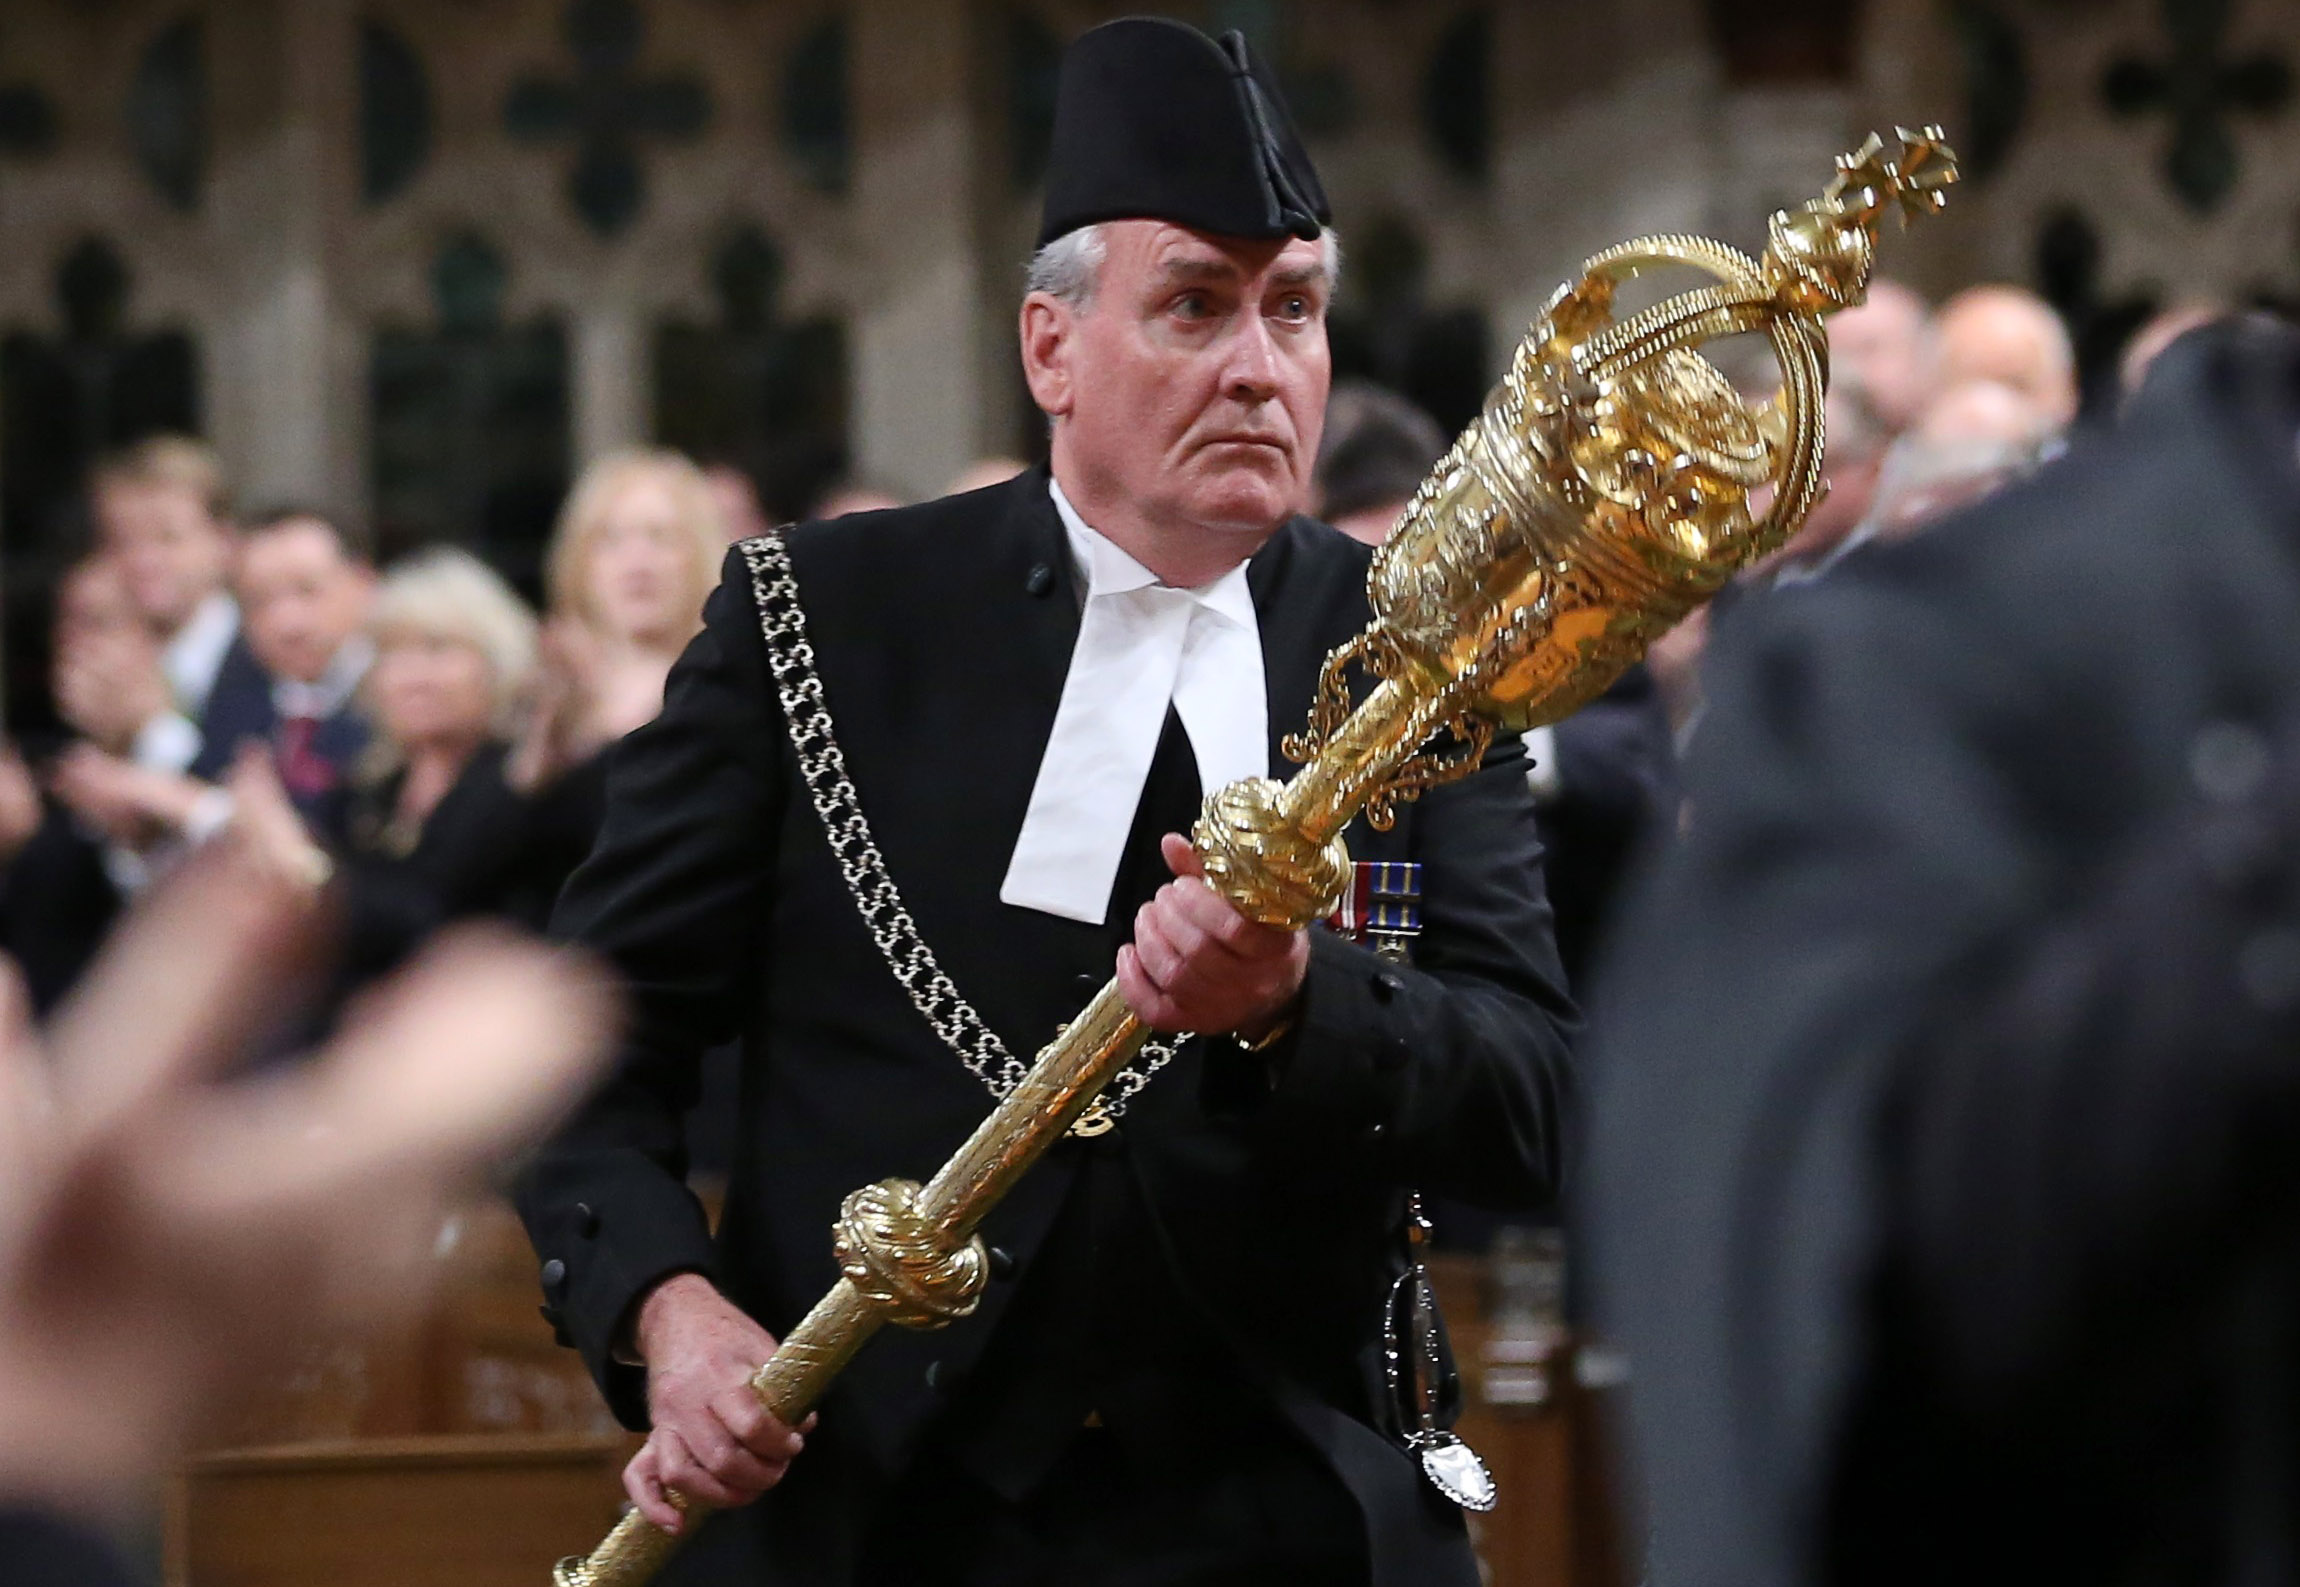 Sergeant-at-Arms Kevin Vickers is applauded in the House of Commons in Ottawa